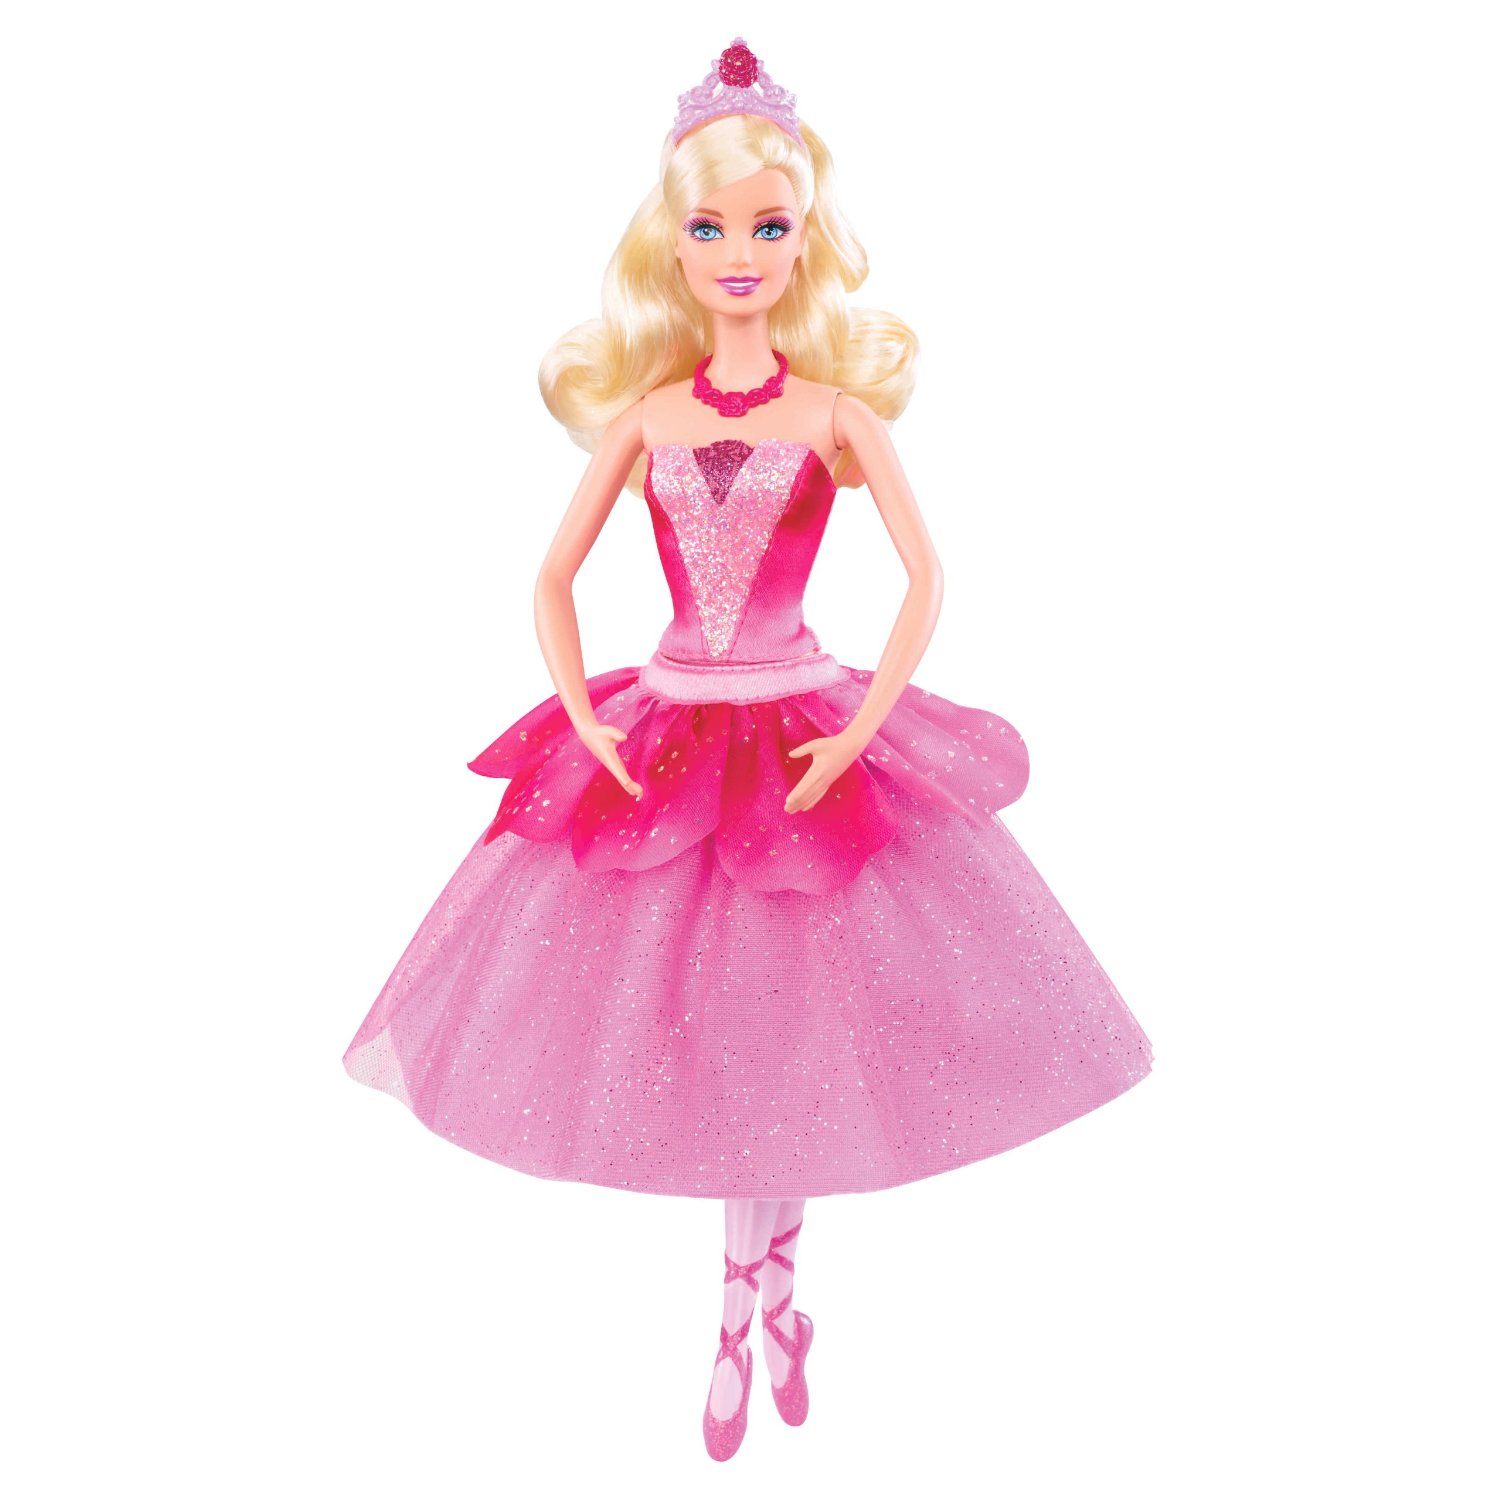 Shoes the Pink  (32780615) shoes doll Barbie Fanpop in Photo  dolls  Kristyn for